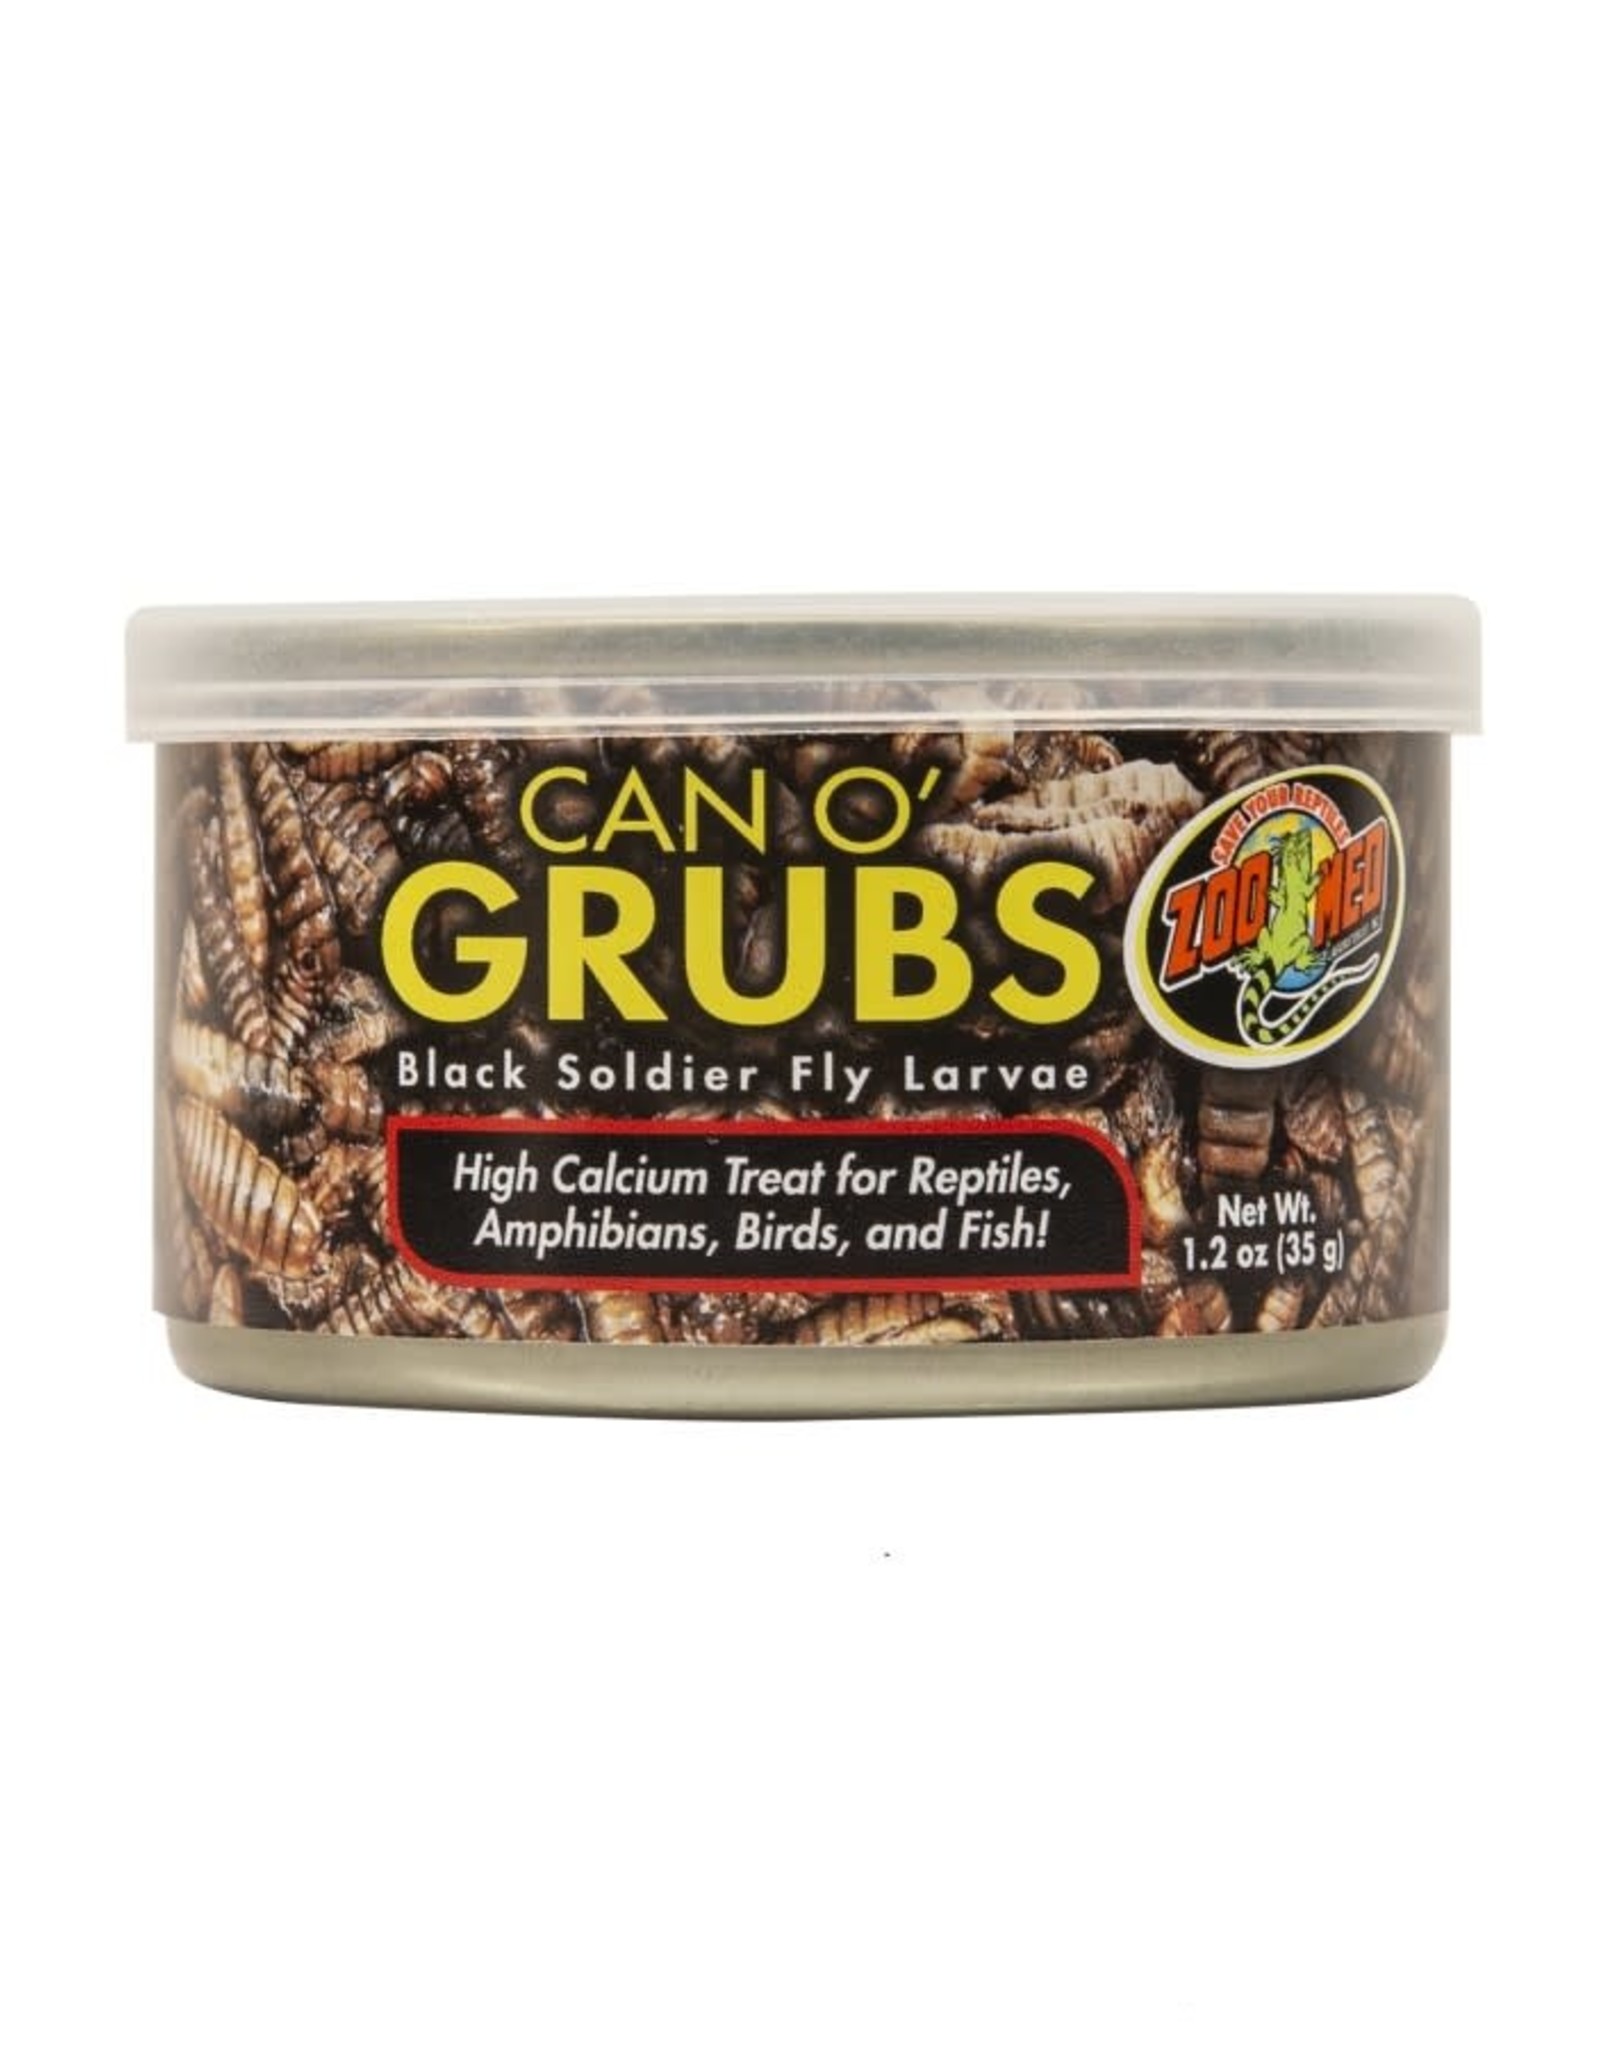 ZOO MED LABORATORIES, INC. ZOO MED ZM-155- CANNED FOOD- CAN O' GRUBS- 1.2 OZ